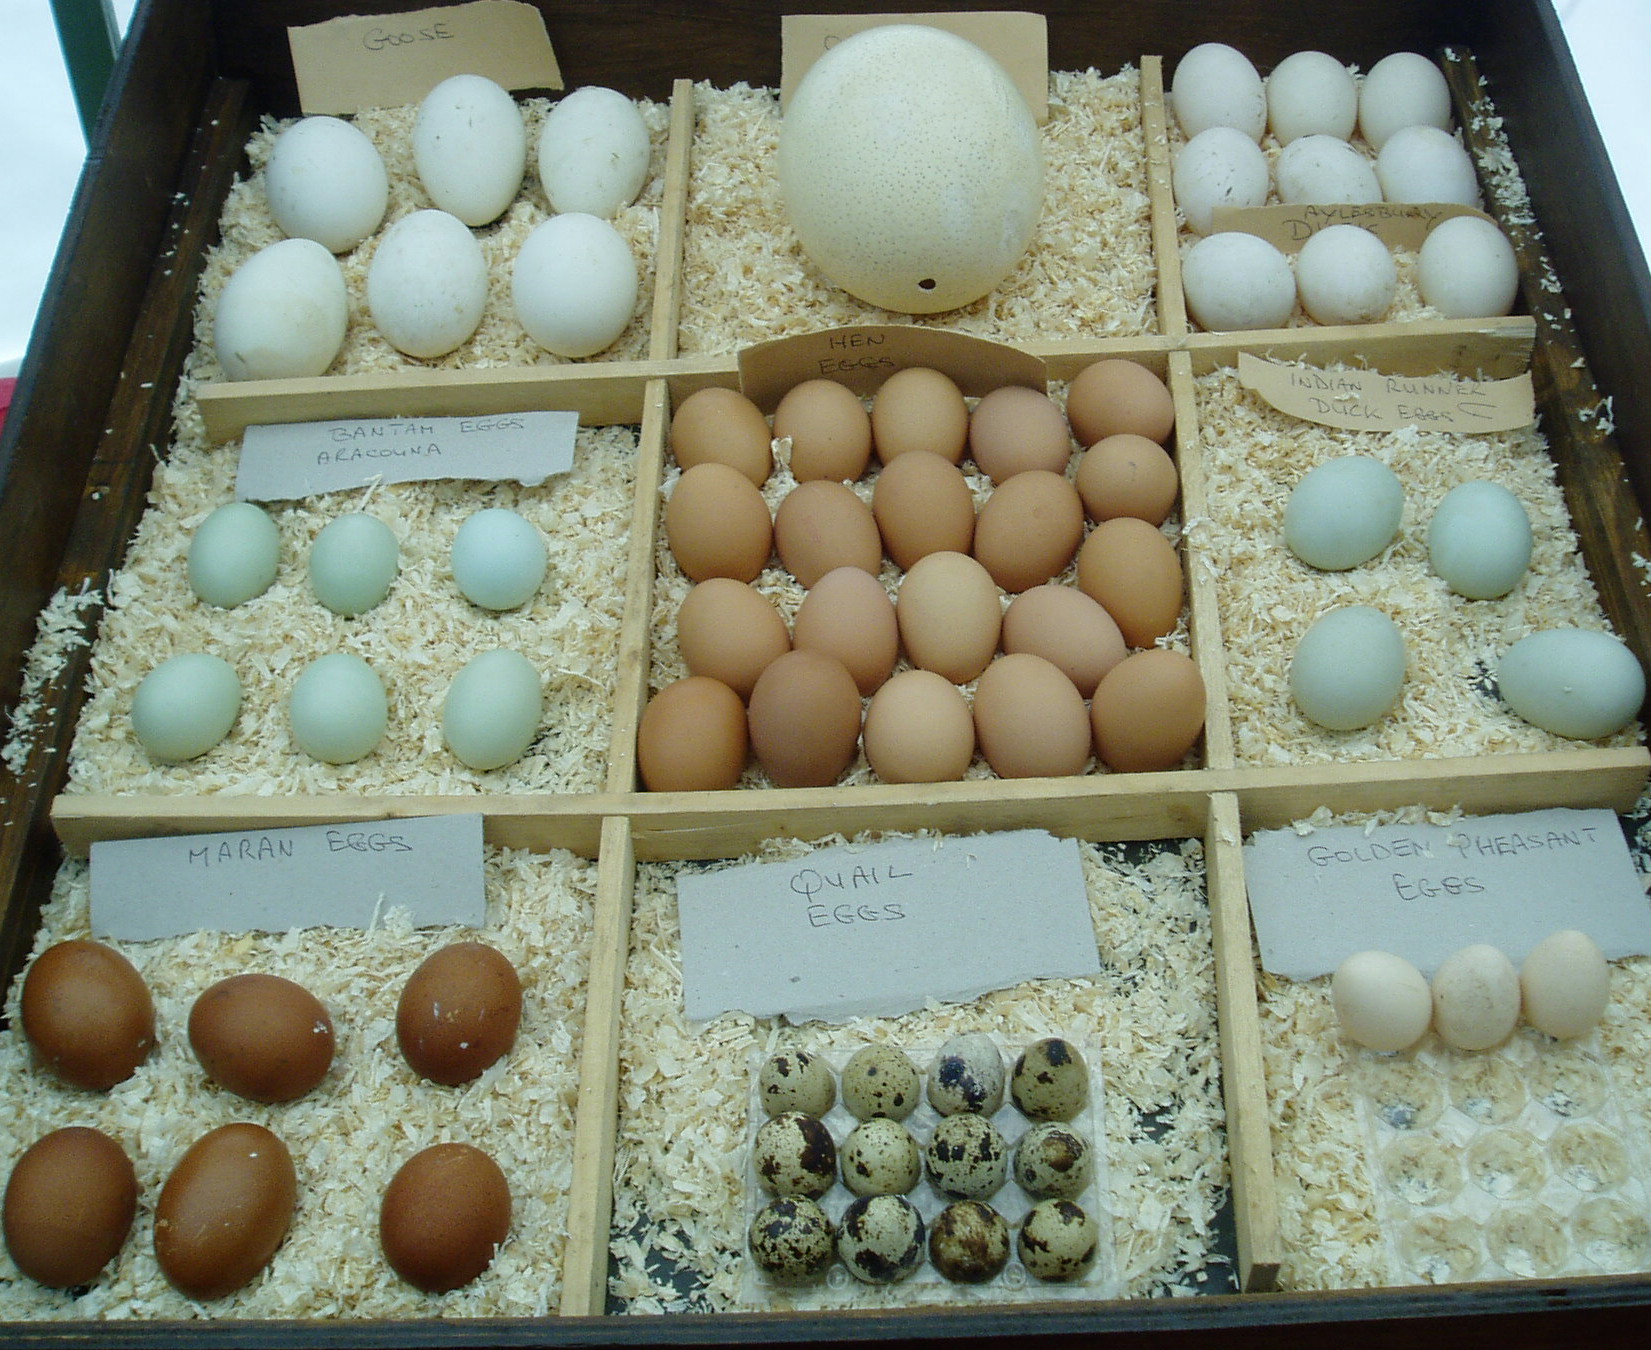 From Quails to Ostrich, eggs come in many shapes and sizes